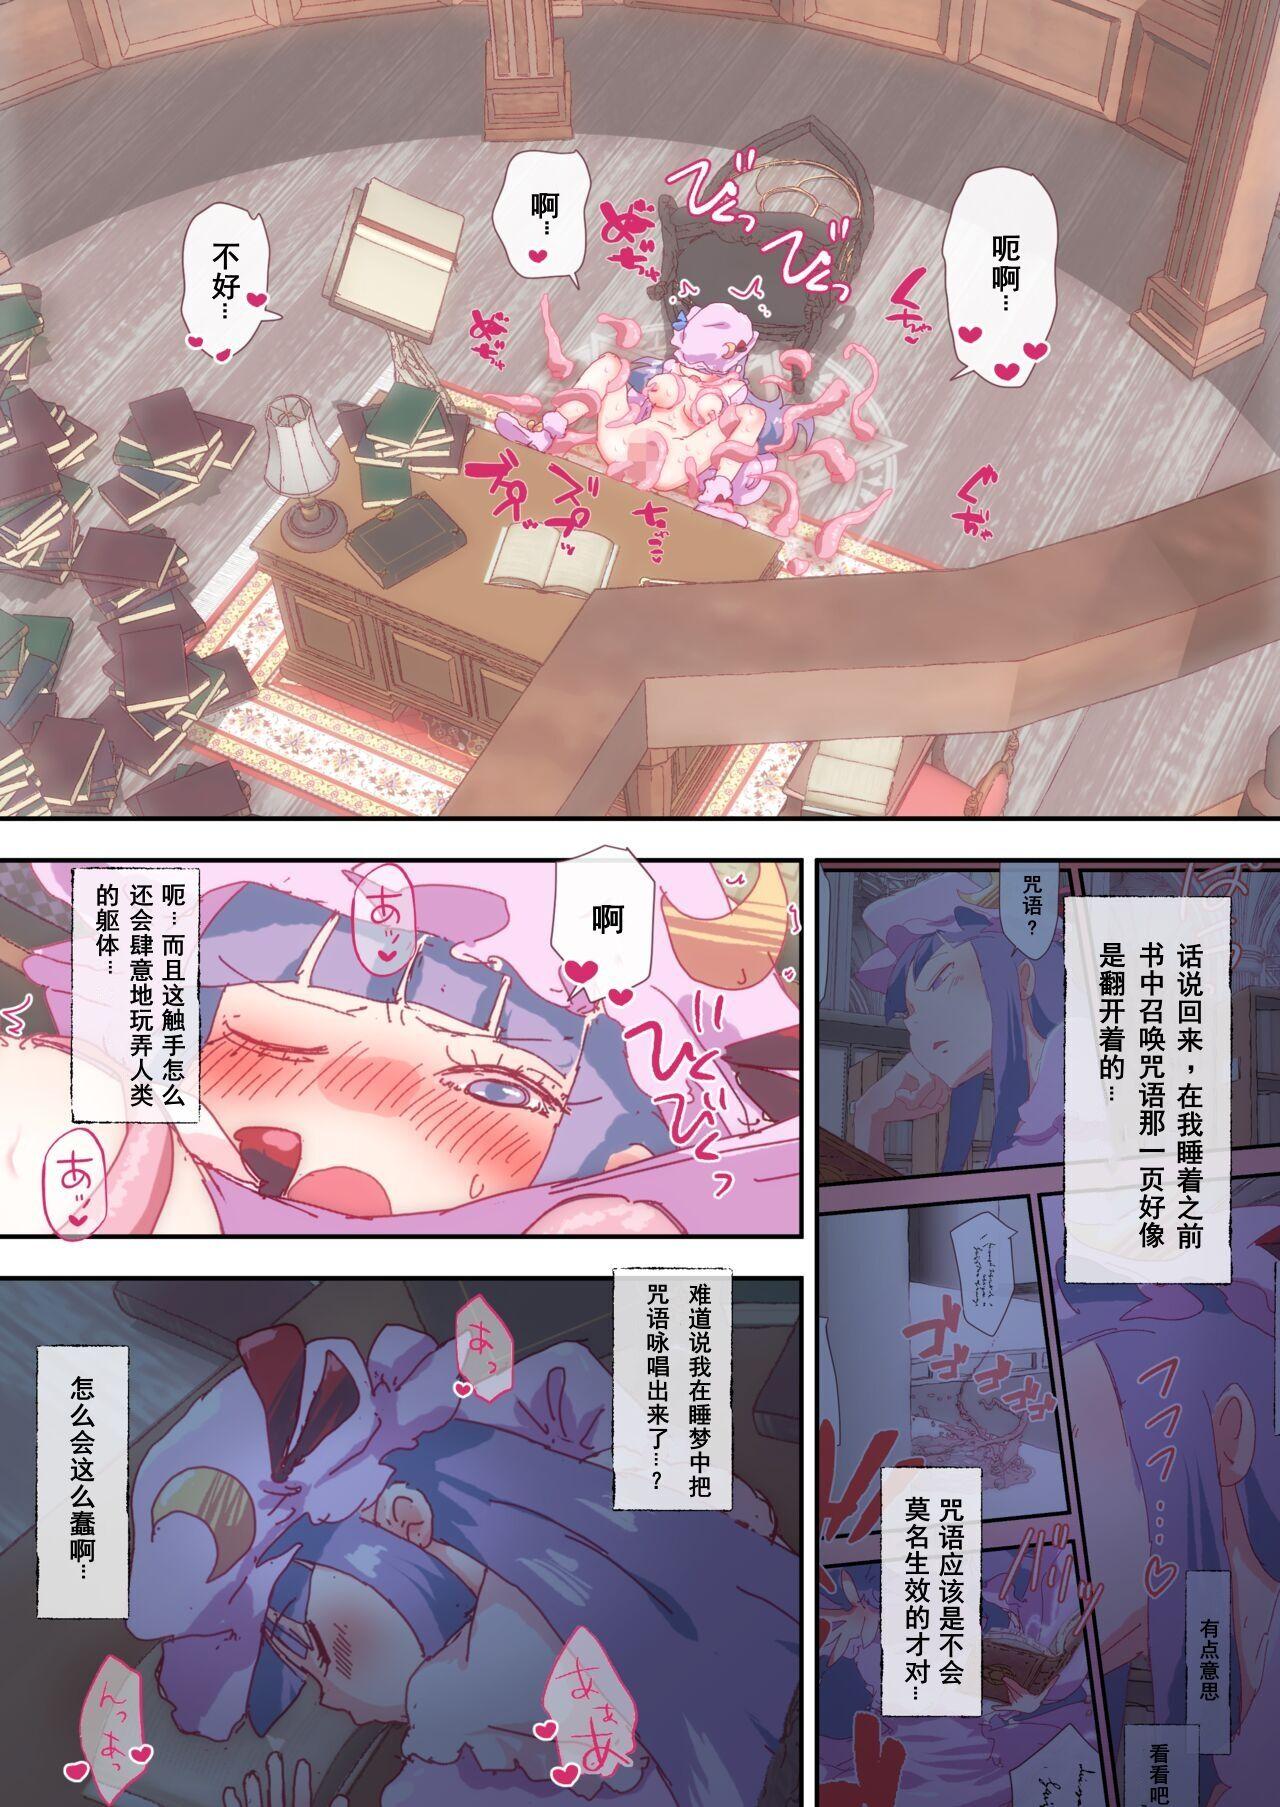 Colombia [Non] inshoku-te to patche-san, futatabi. (Touhou Project)(Chinese) - Touhou project Gay Outinpublic - Page 4